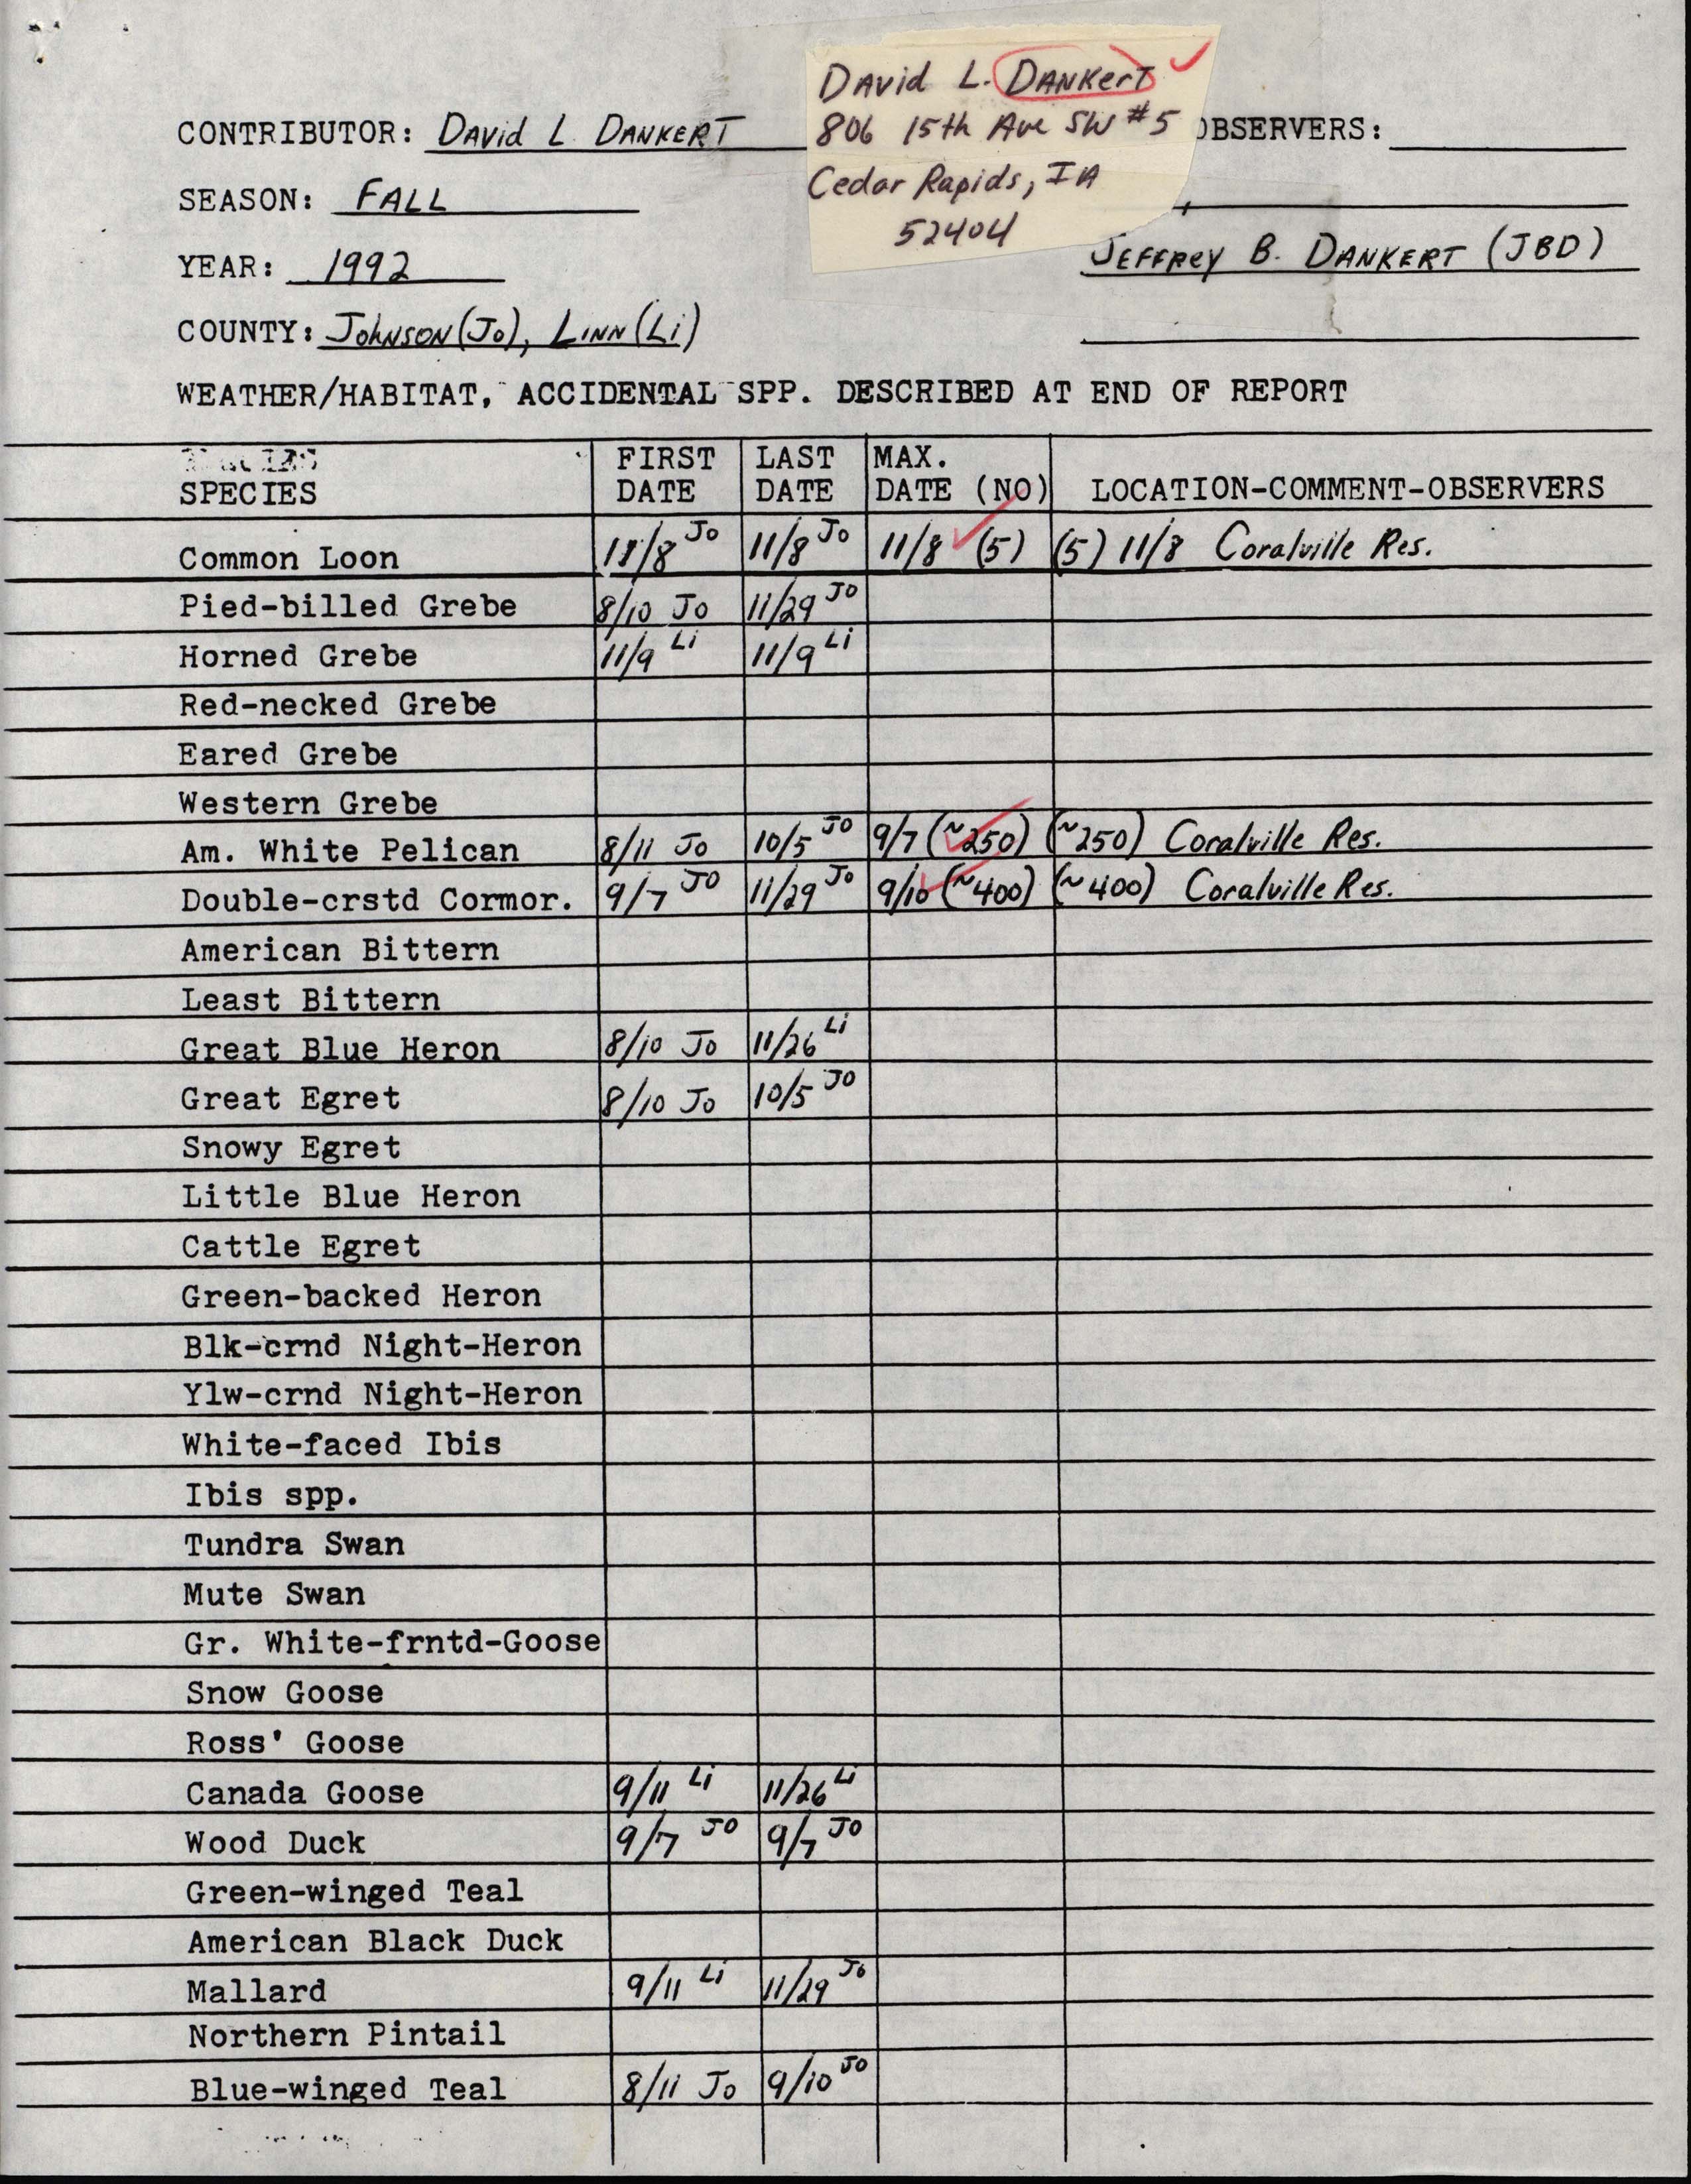 Field notes contributed by David L. Dankert, fall 1992